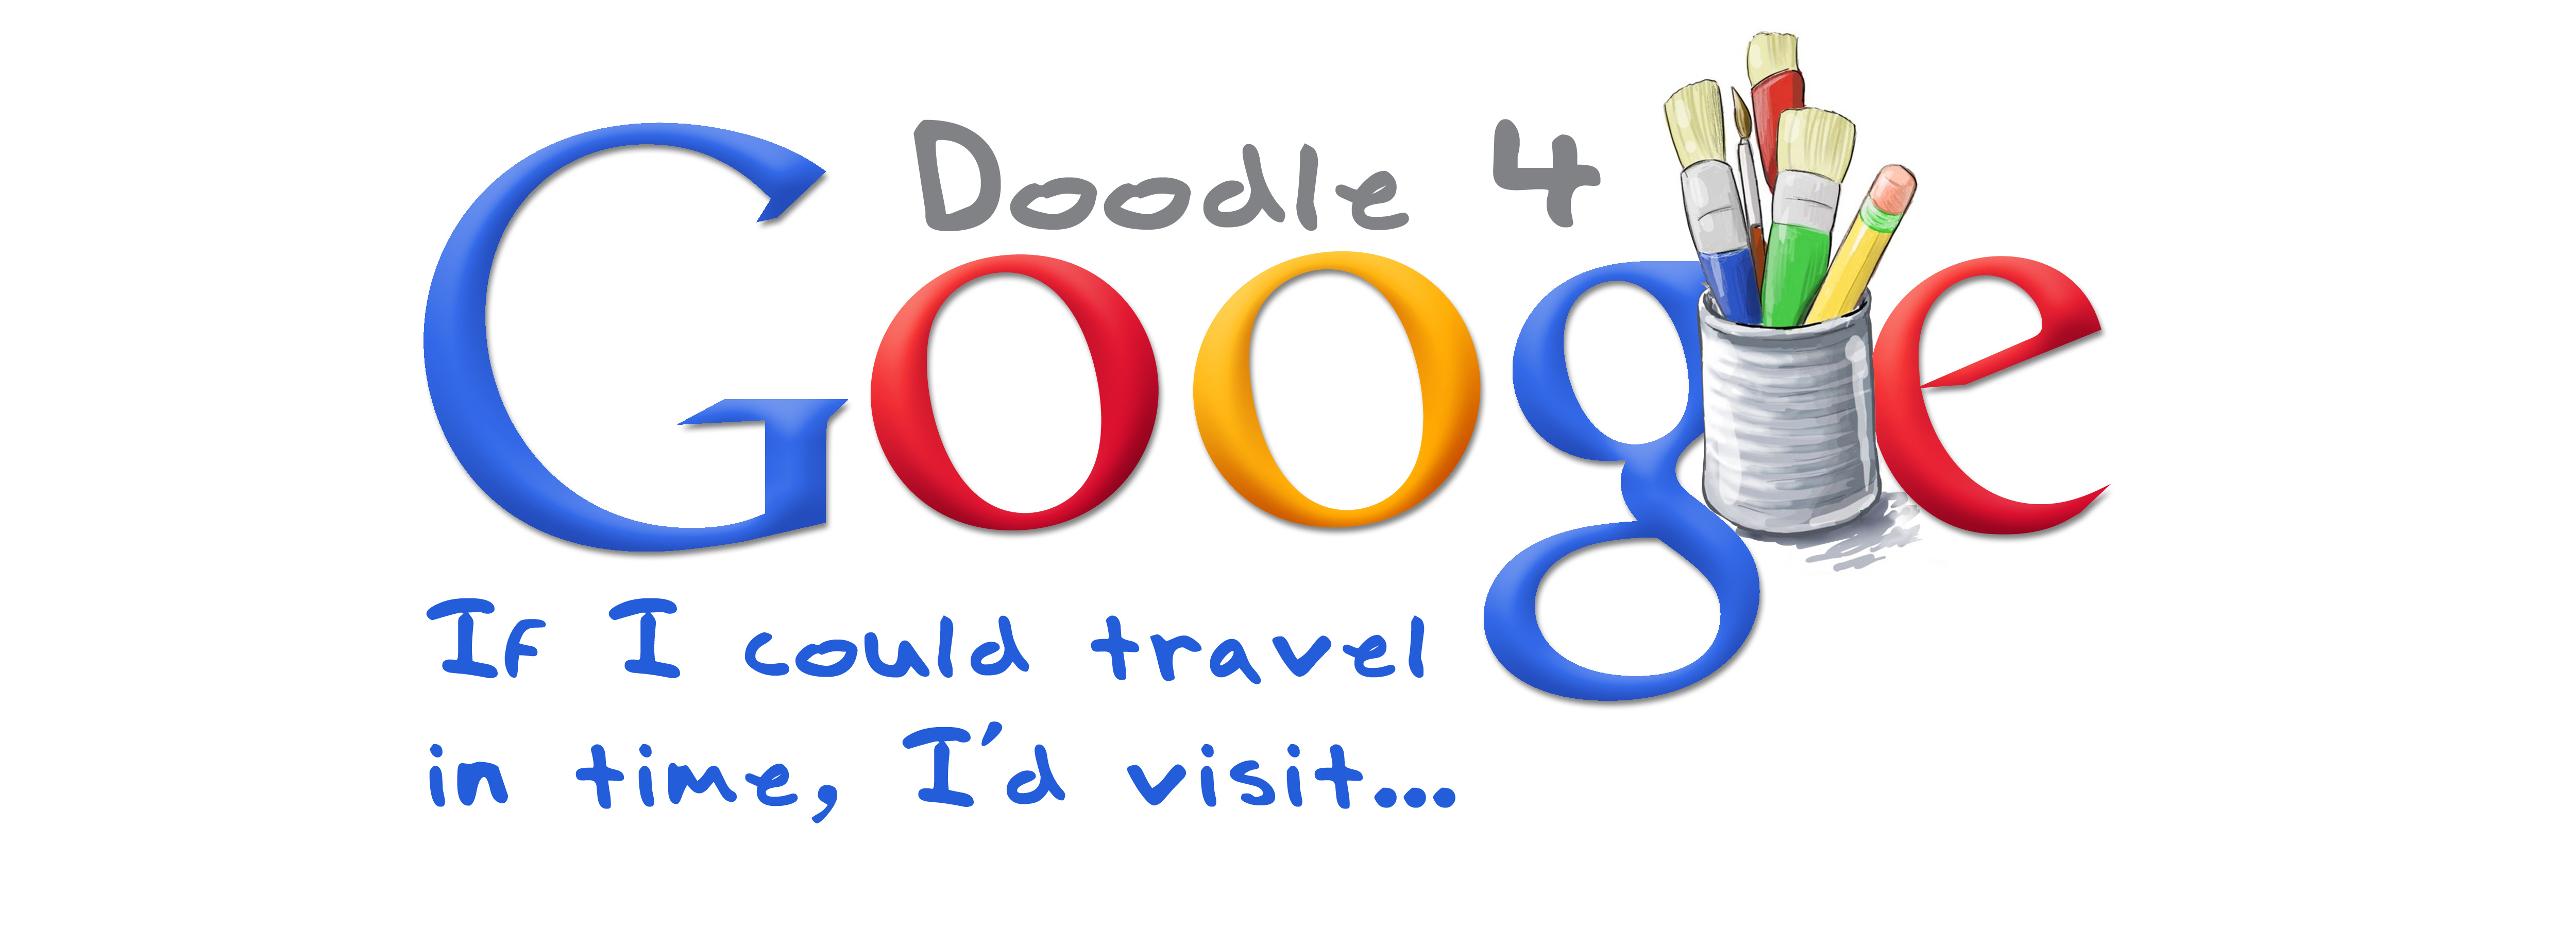 Doodle 4 Google's National Finalists public voting opens today